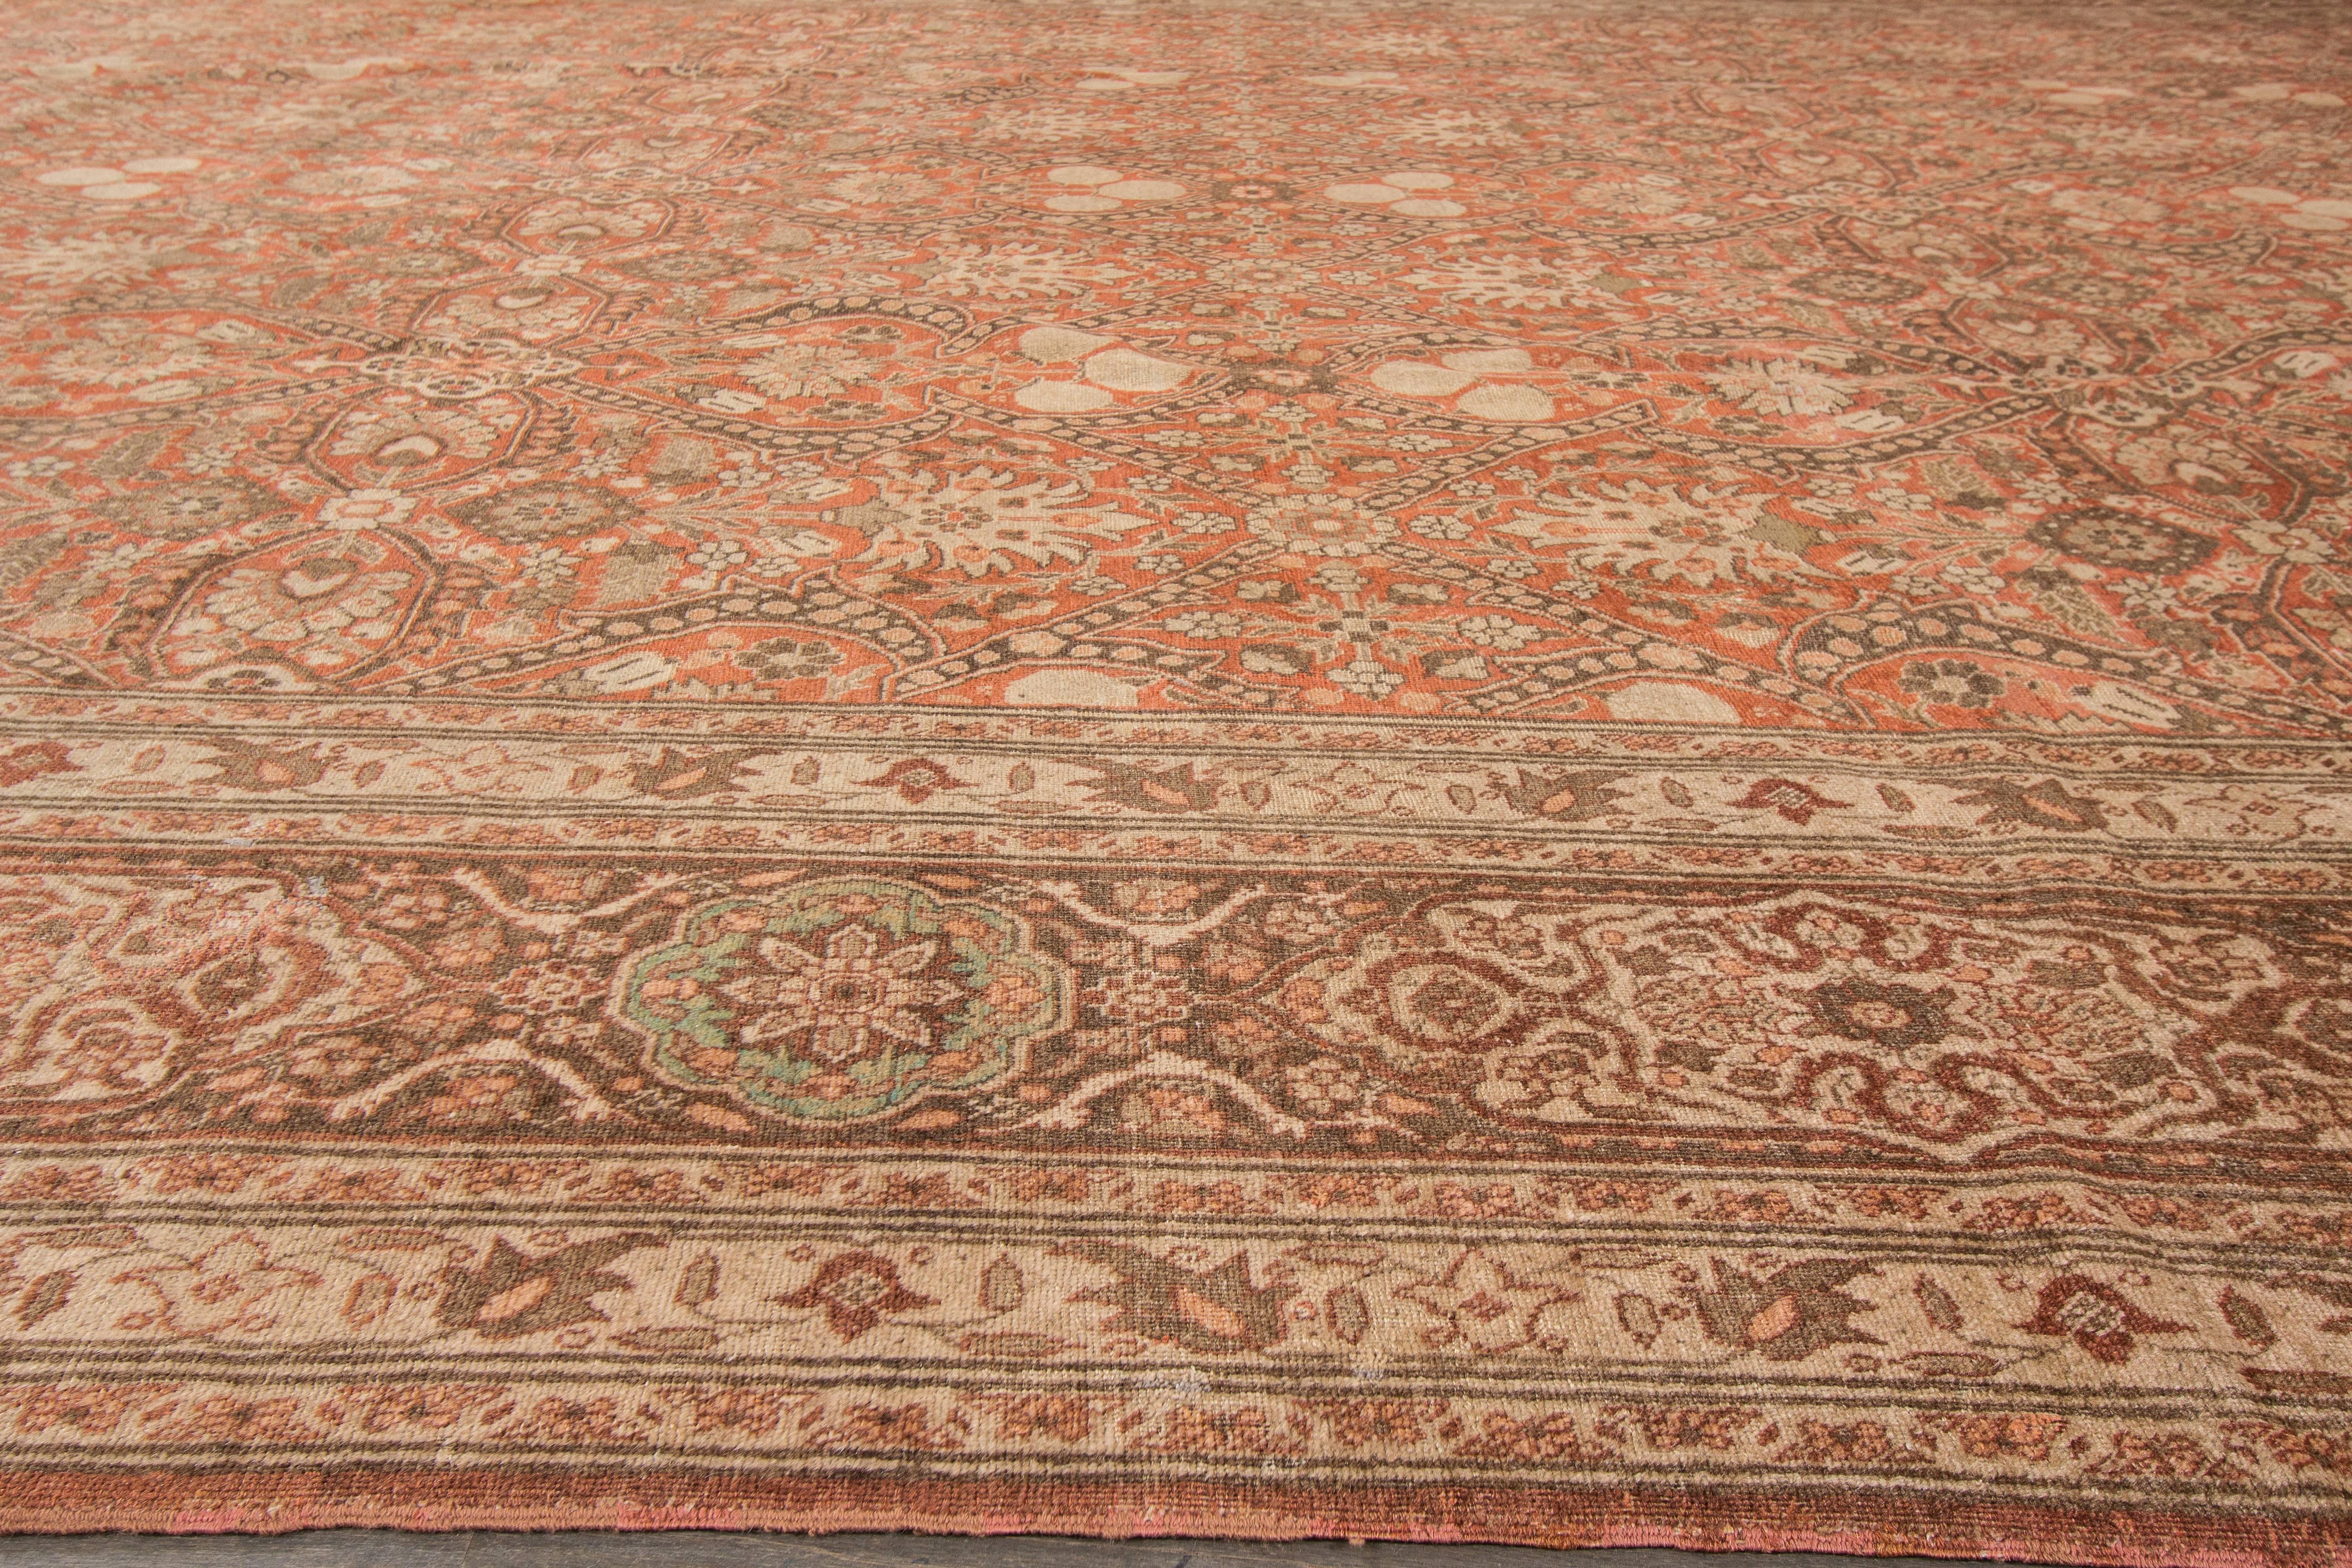 Hand-knotted rug with a floral design on a rust field. 

This rug has magnificent detailing and would be perfect for any room. Measures: 12' x 19'.